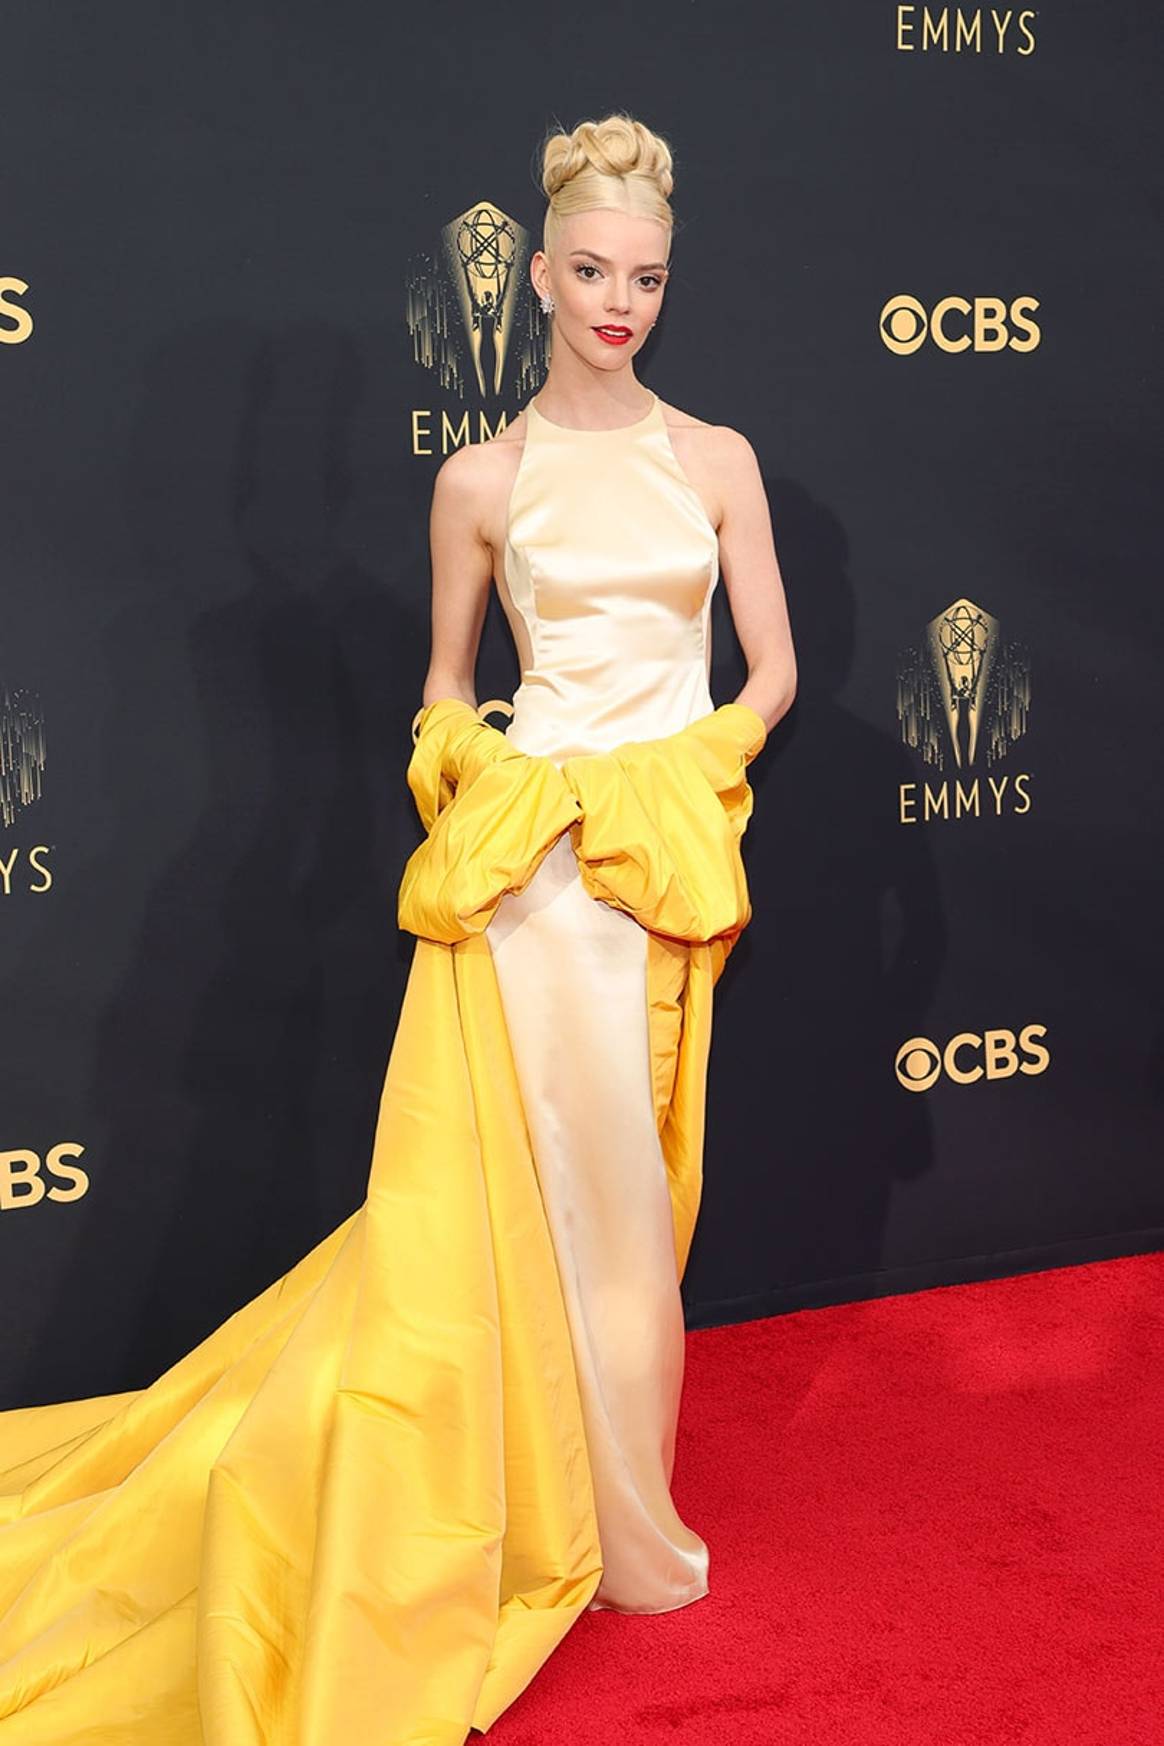 Television's best bring glamour to Emmys red carpet